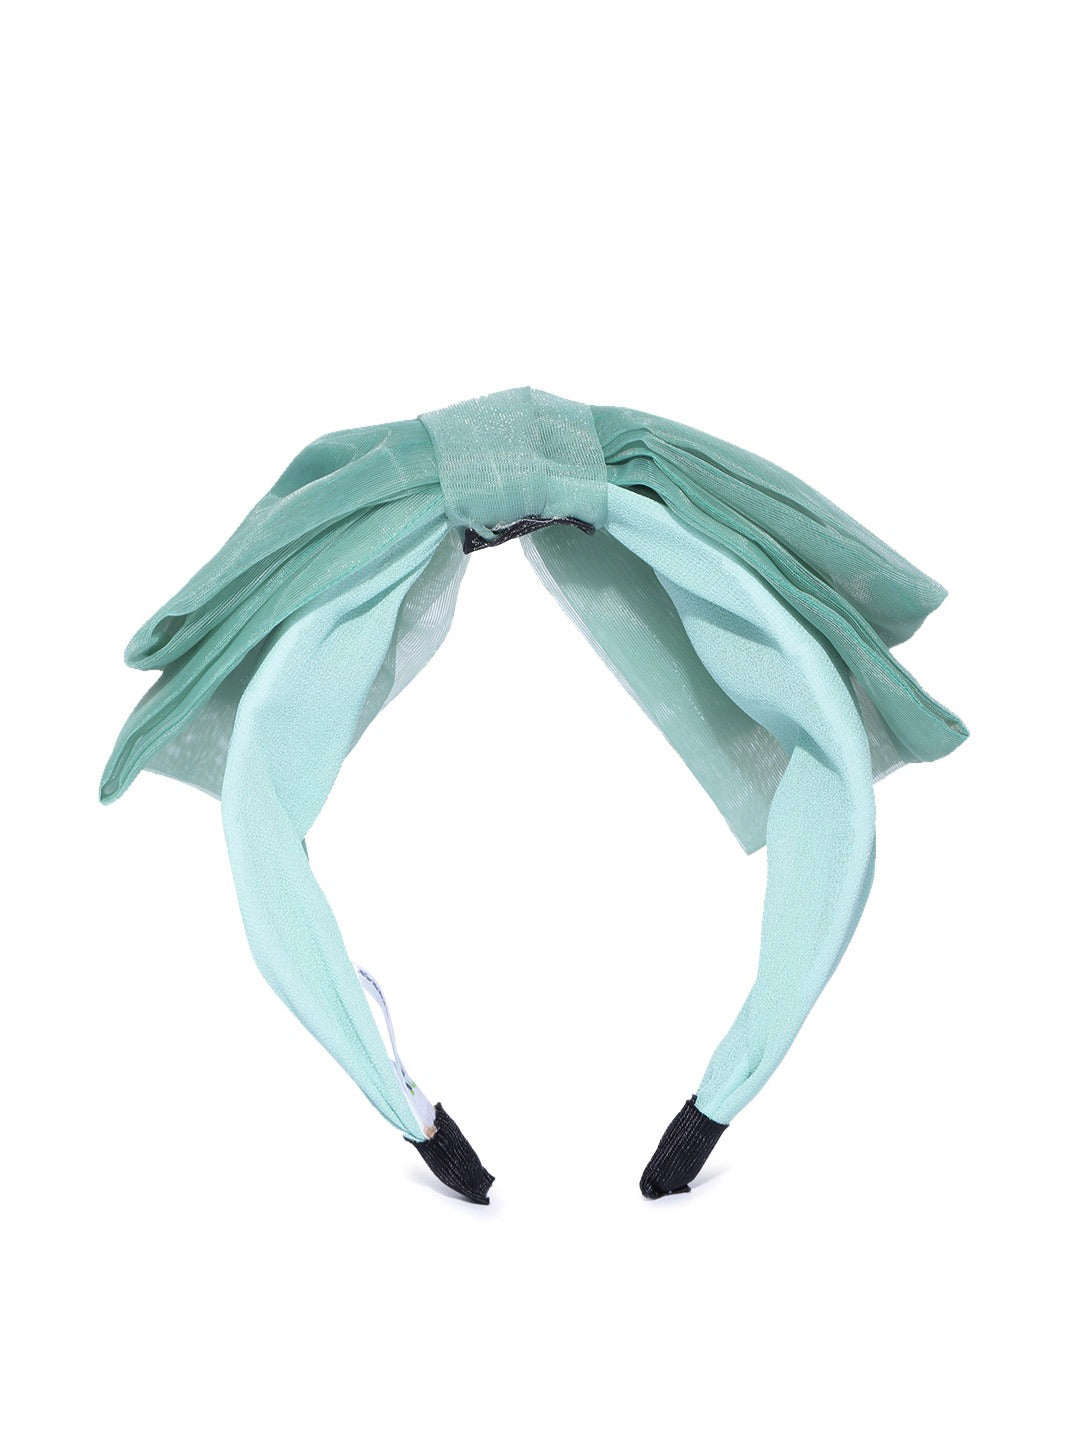 Blueberry Sea green net fabric knot hair band